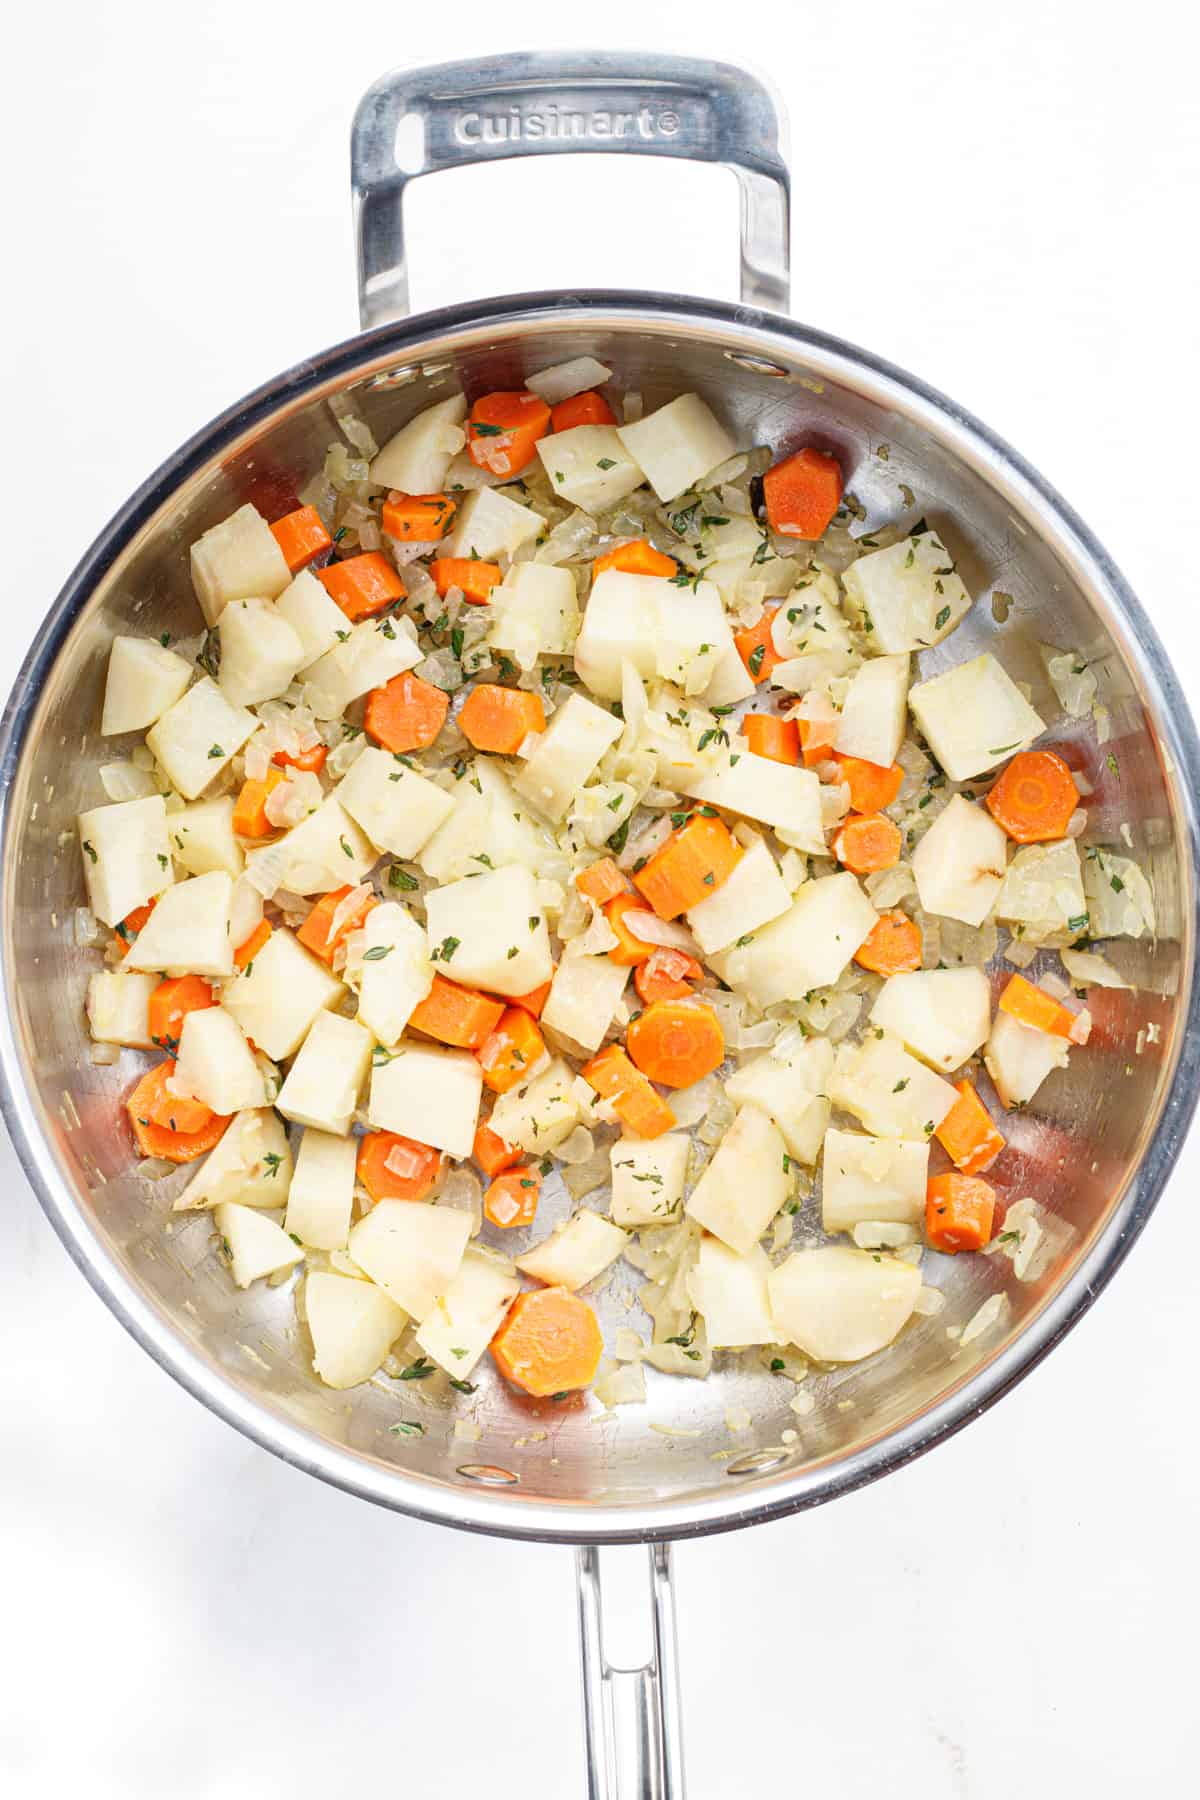 Sautéed onions, carrots, potatoes and herbs in a stainless steel pot.